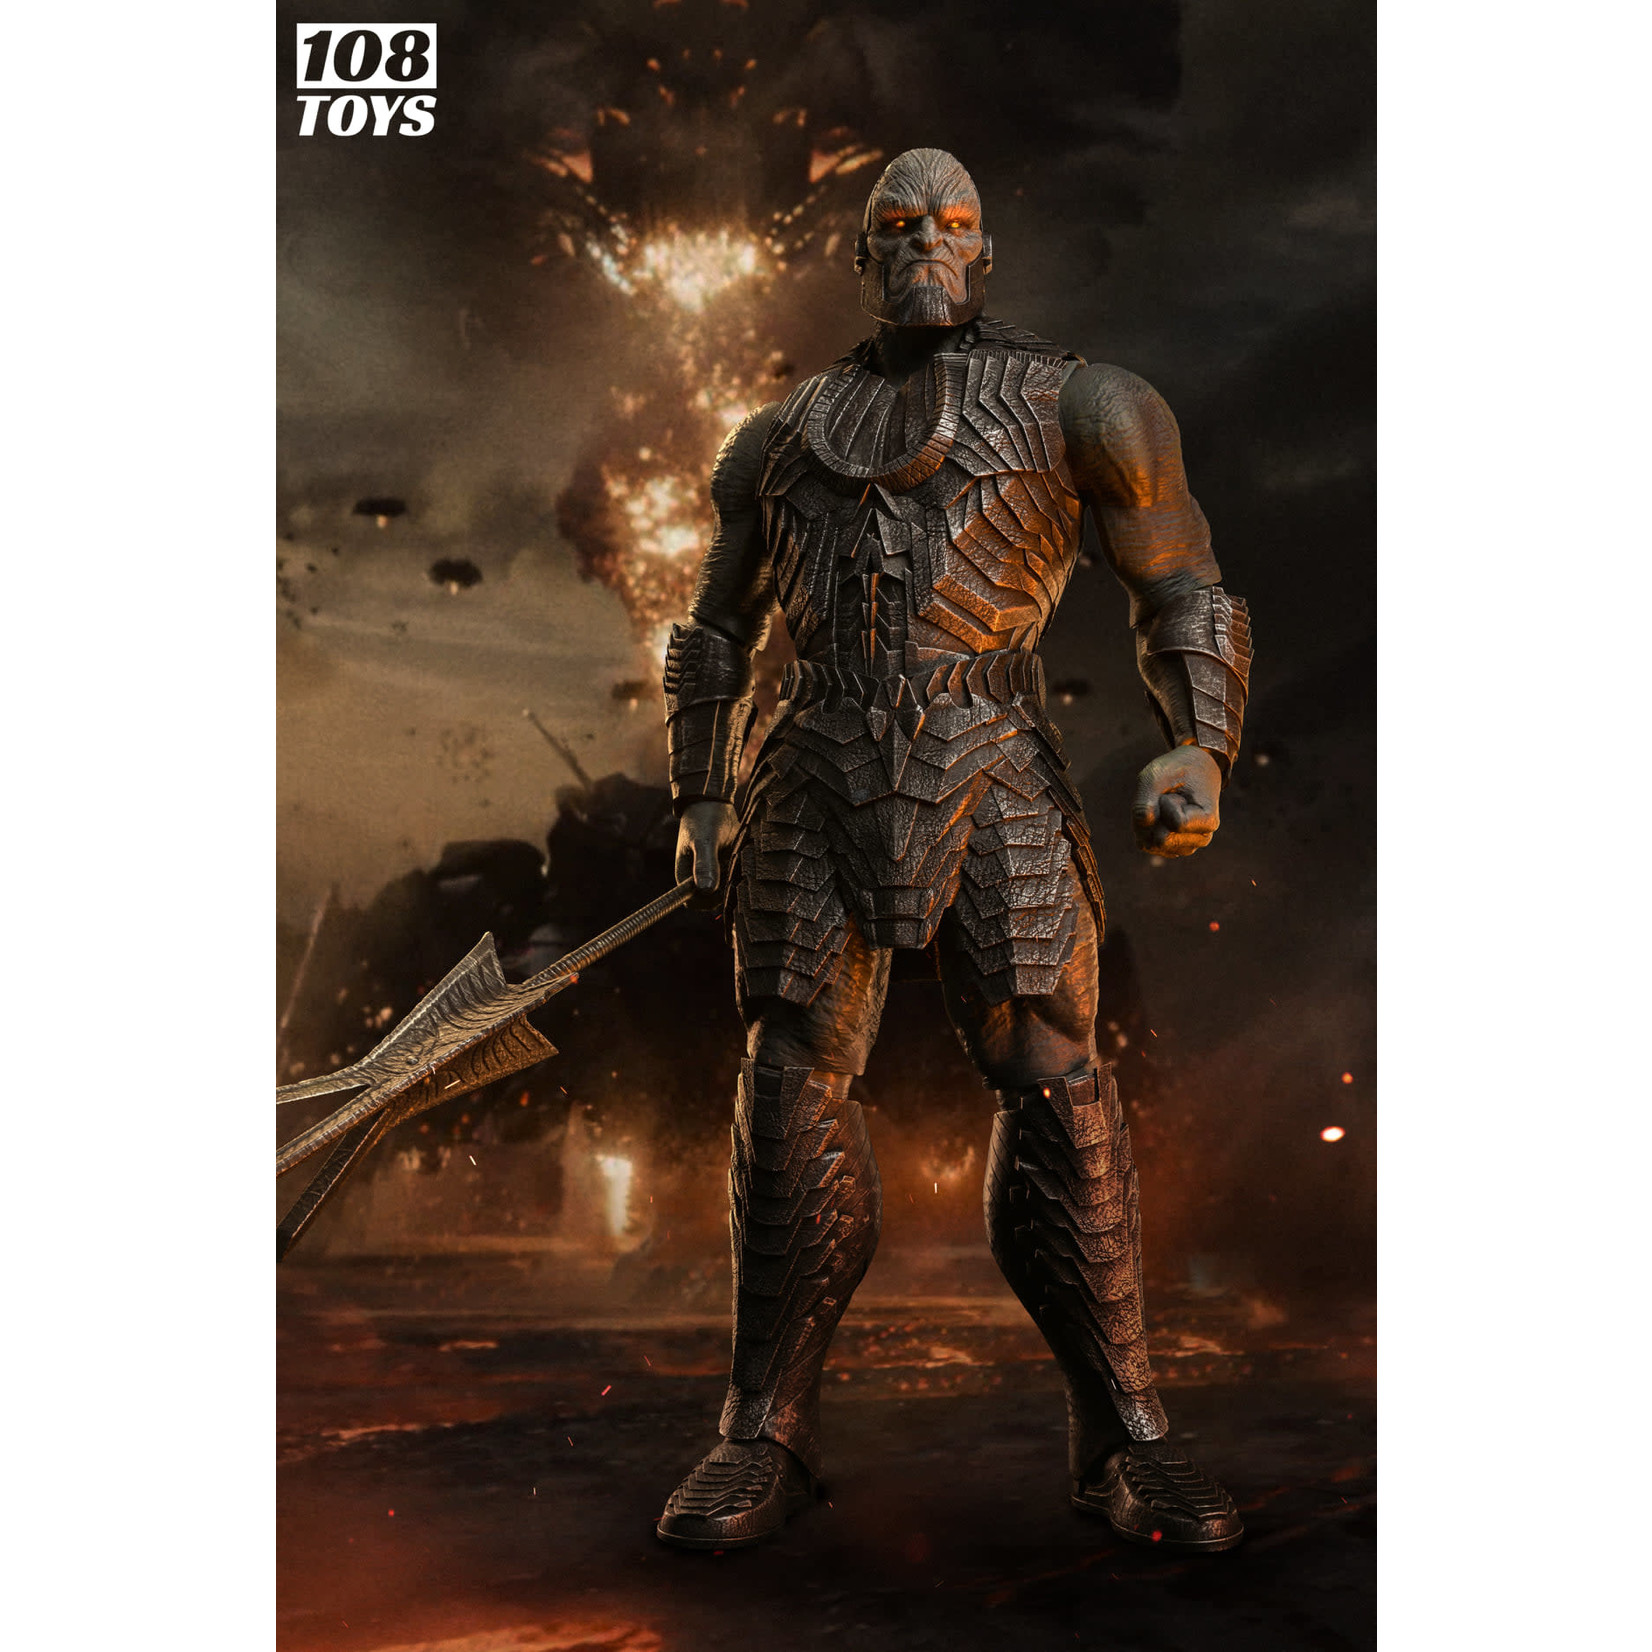 108toys [Preorder] 108toys 1/6 the God of Death figure (Darkseid Justice League Snyder Cut)